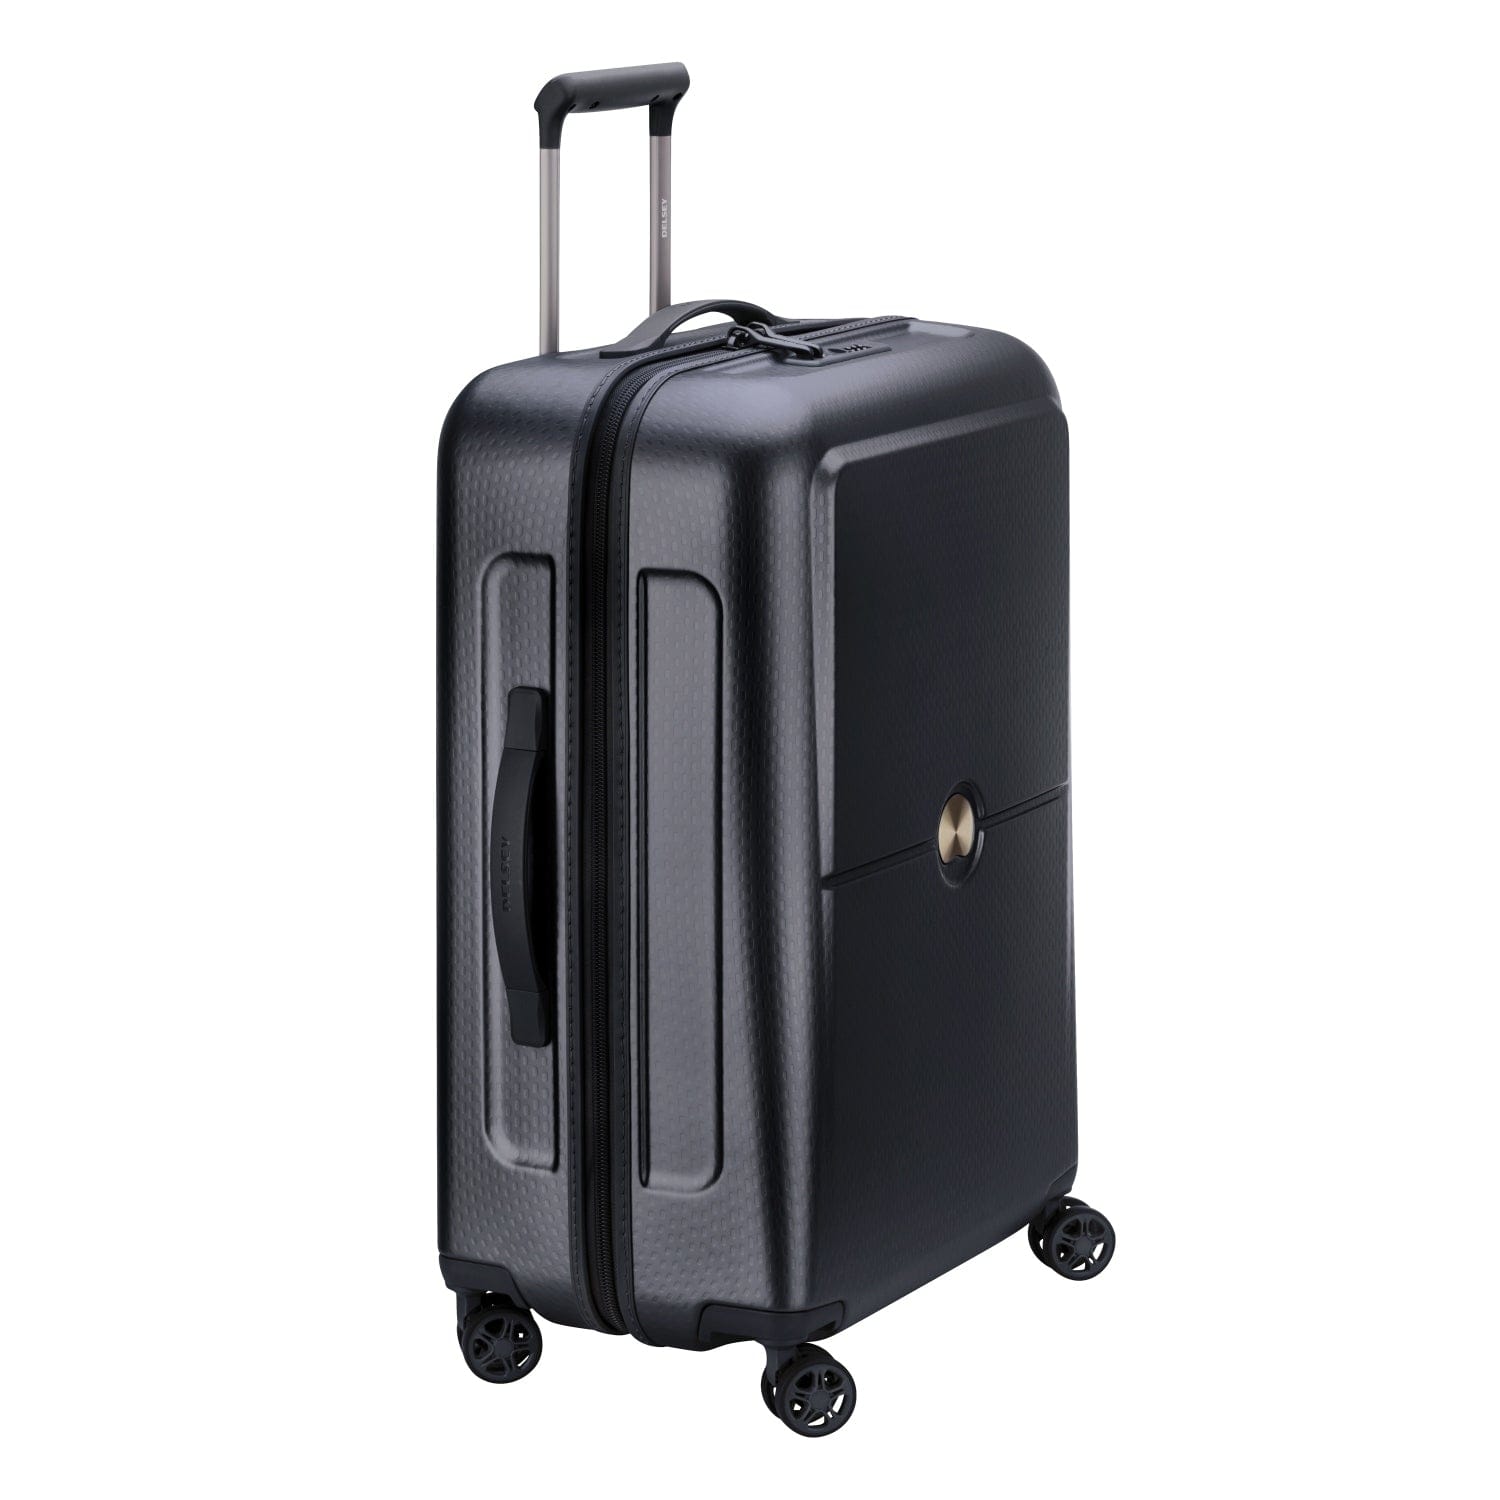 Delsey Turenne 65cm 4 Double Wheel Check-In Luggage Trolley Black - 00162181000